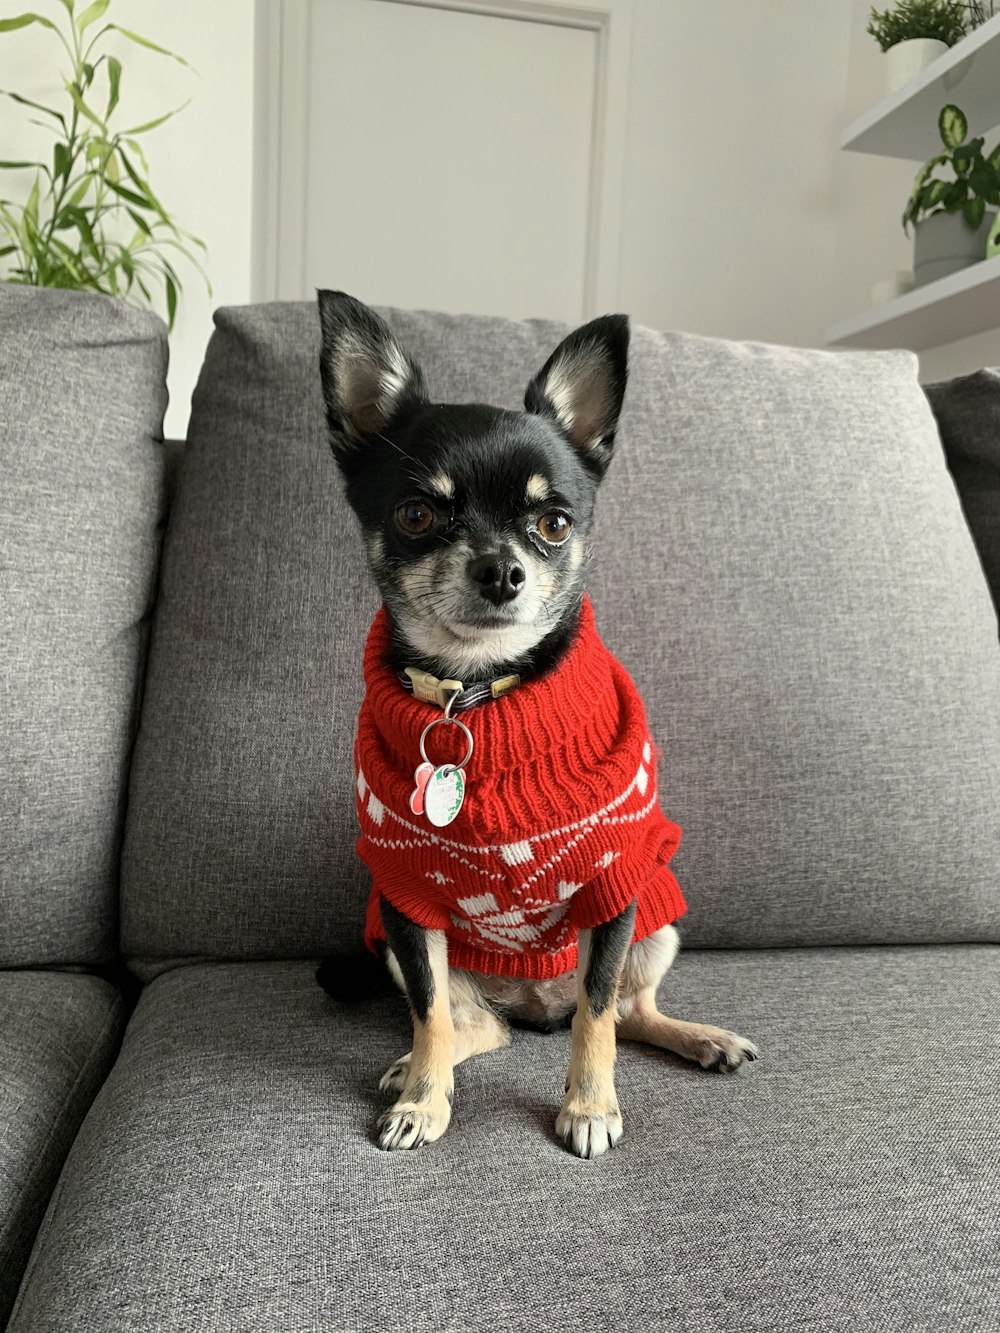 black and brown chihuahua wearing red shirt sitting on gray sofa